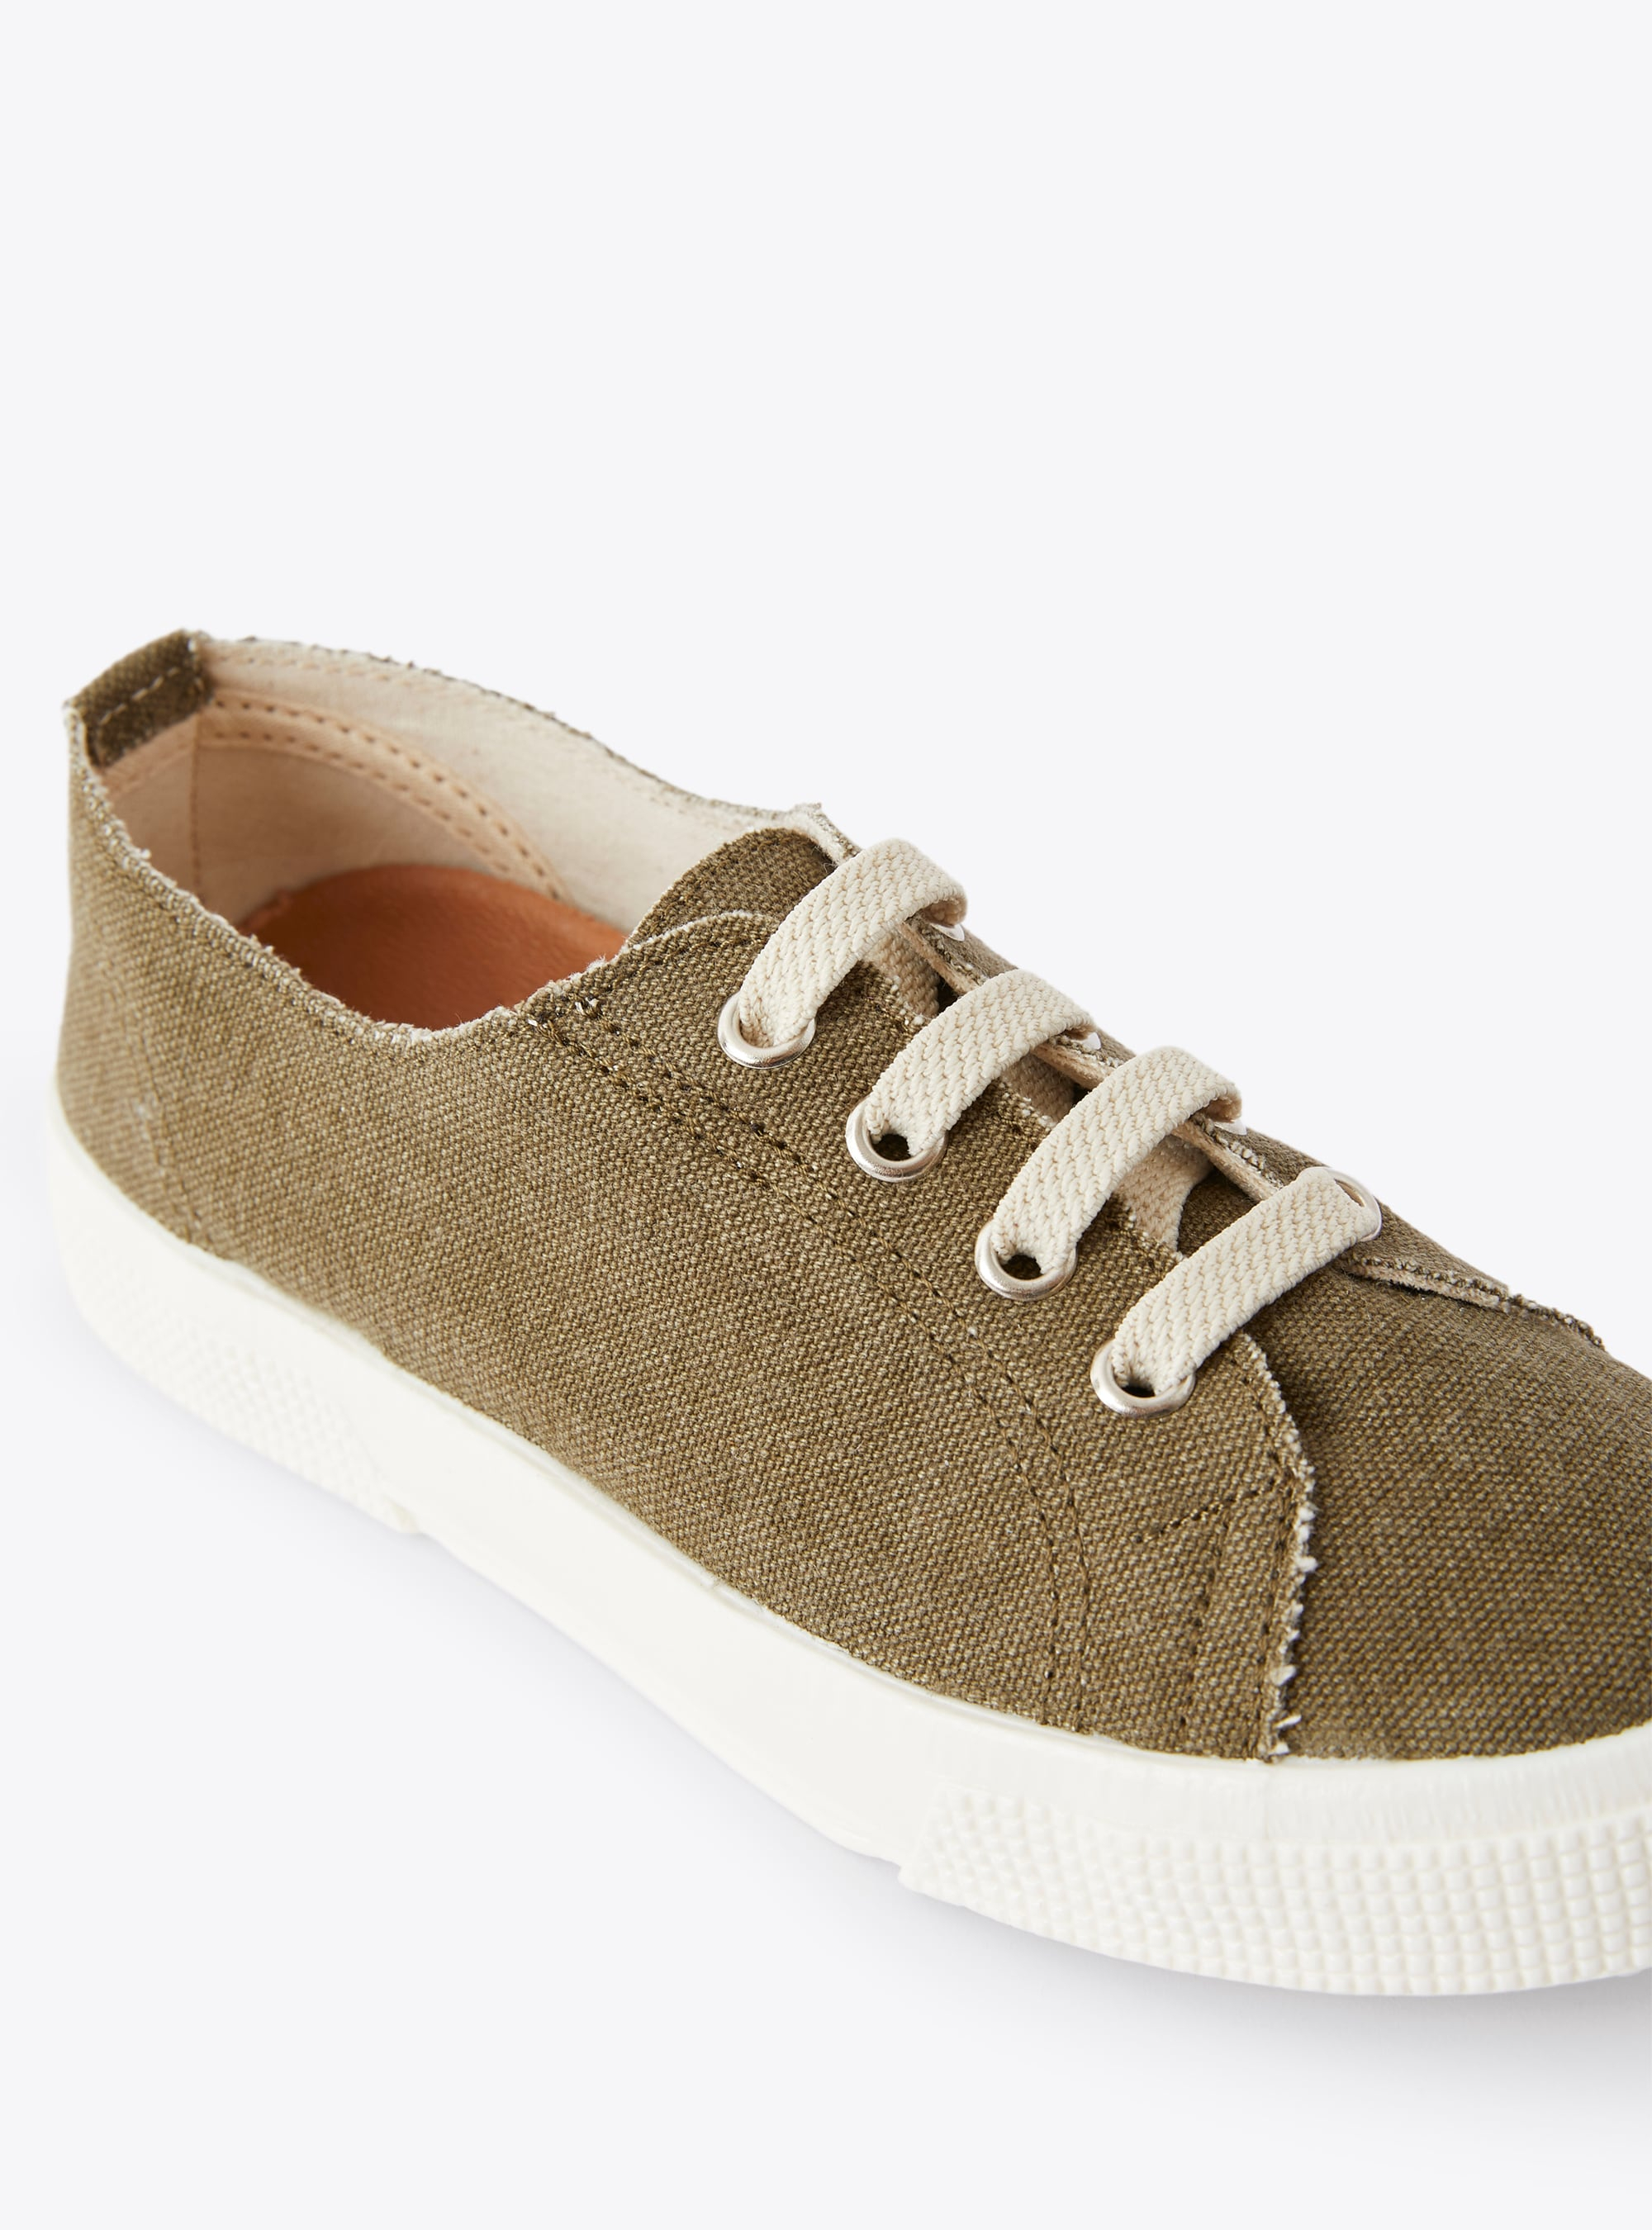 Sneaker in green canvas with laces - Green | Il Gufo